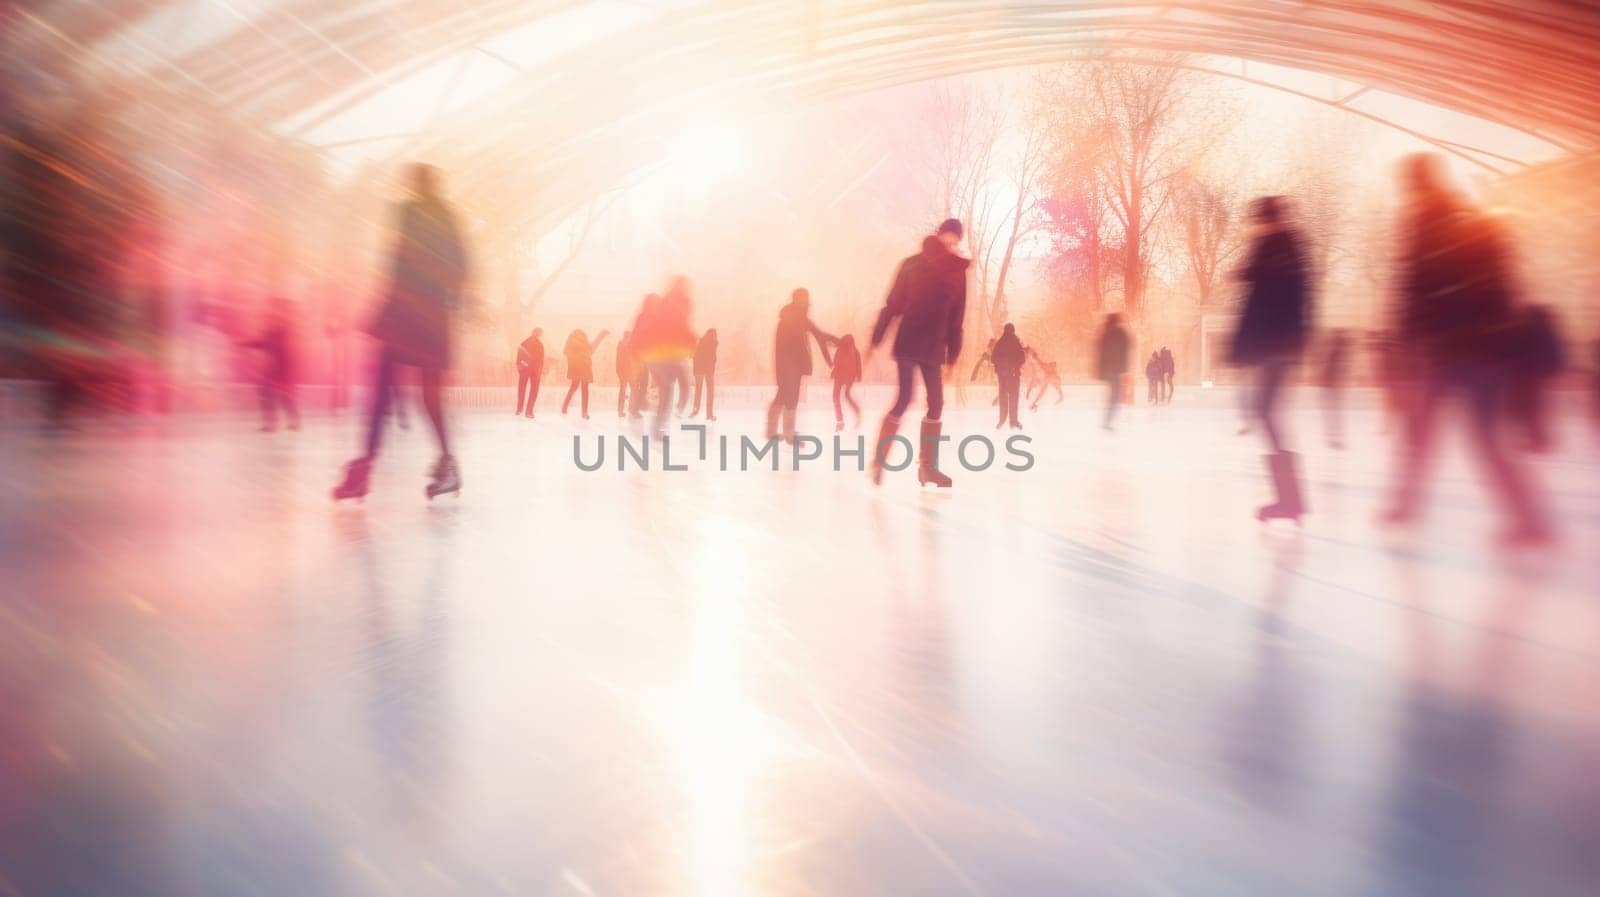 Ice skating rink in winter. Happy moments spent together AI Blurred background